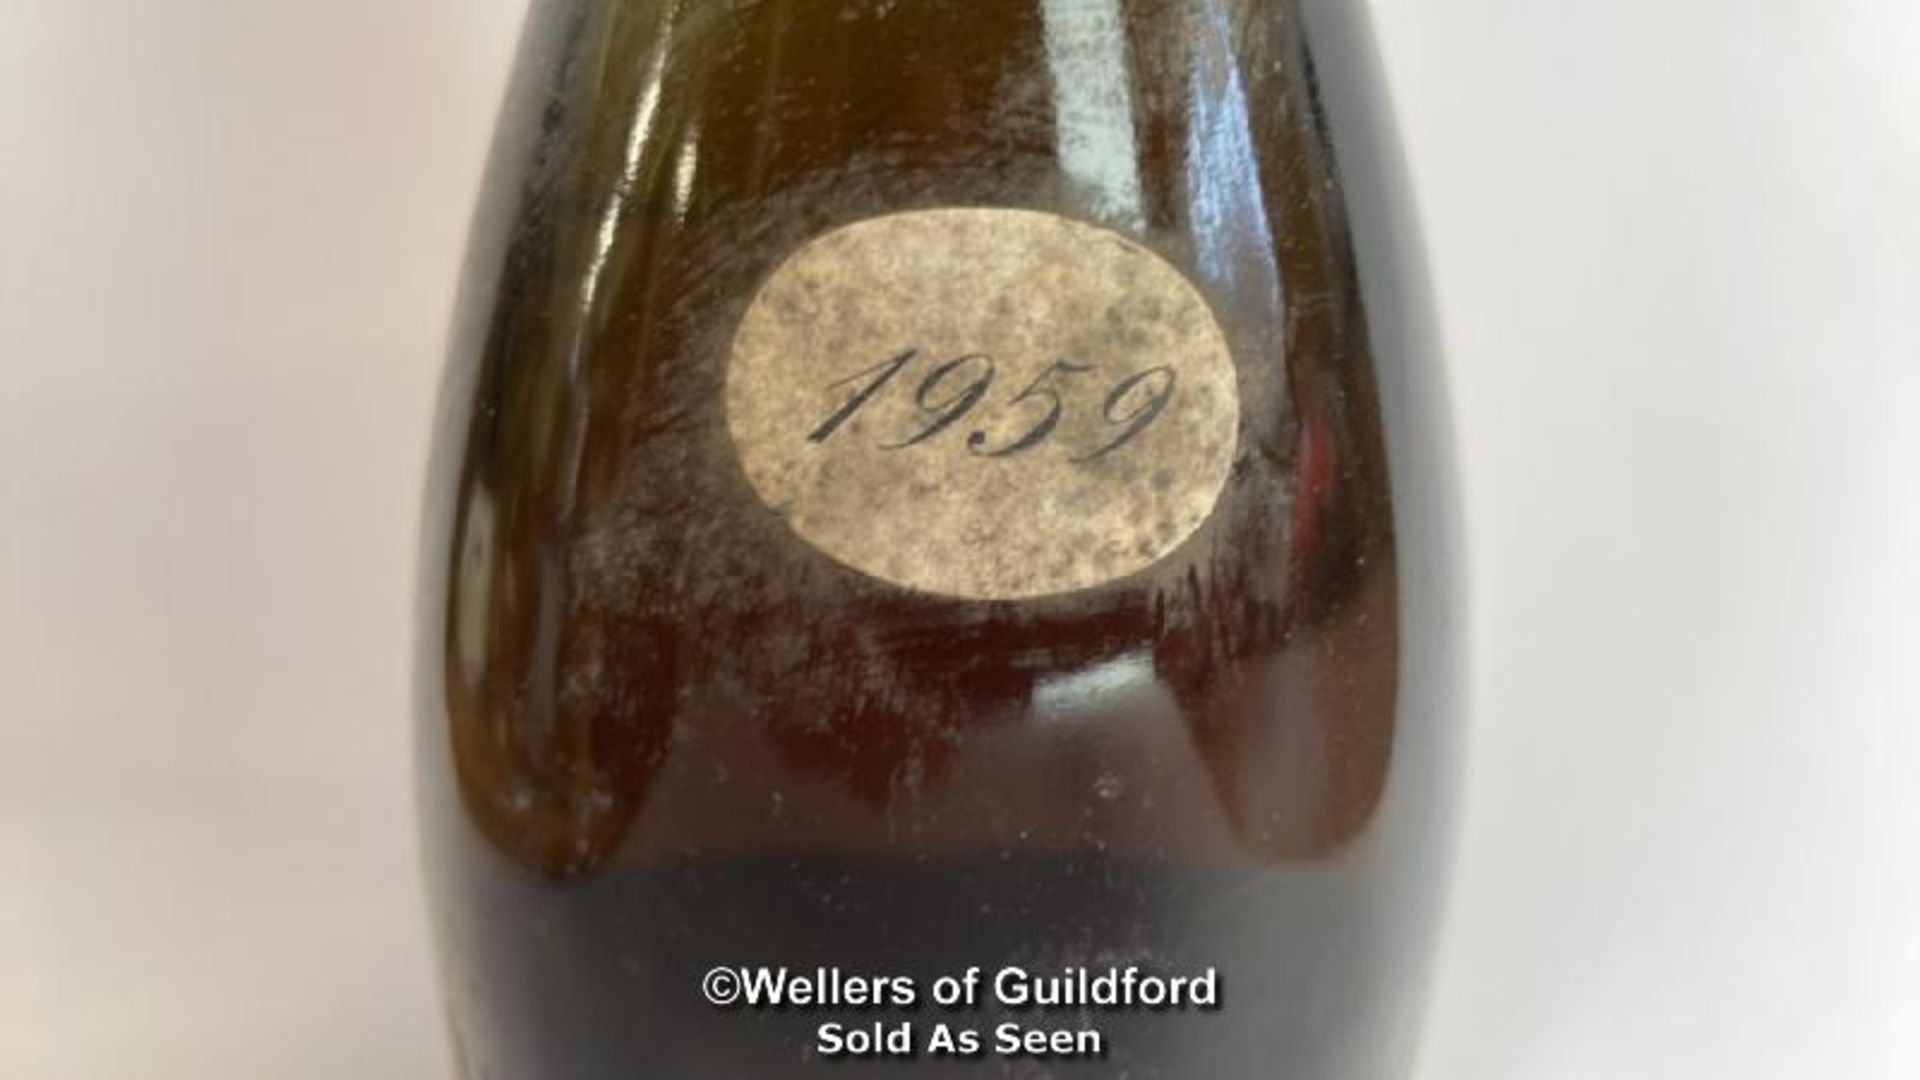 1959 Moulin Touchais Anjou L.Touchais Proprietaire, 73cl, 12% vol / Please see images for fill level - Image 10 of 14